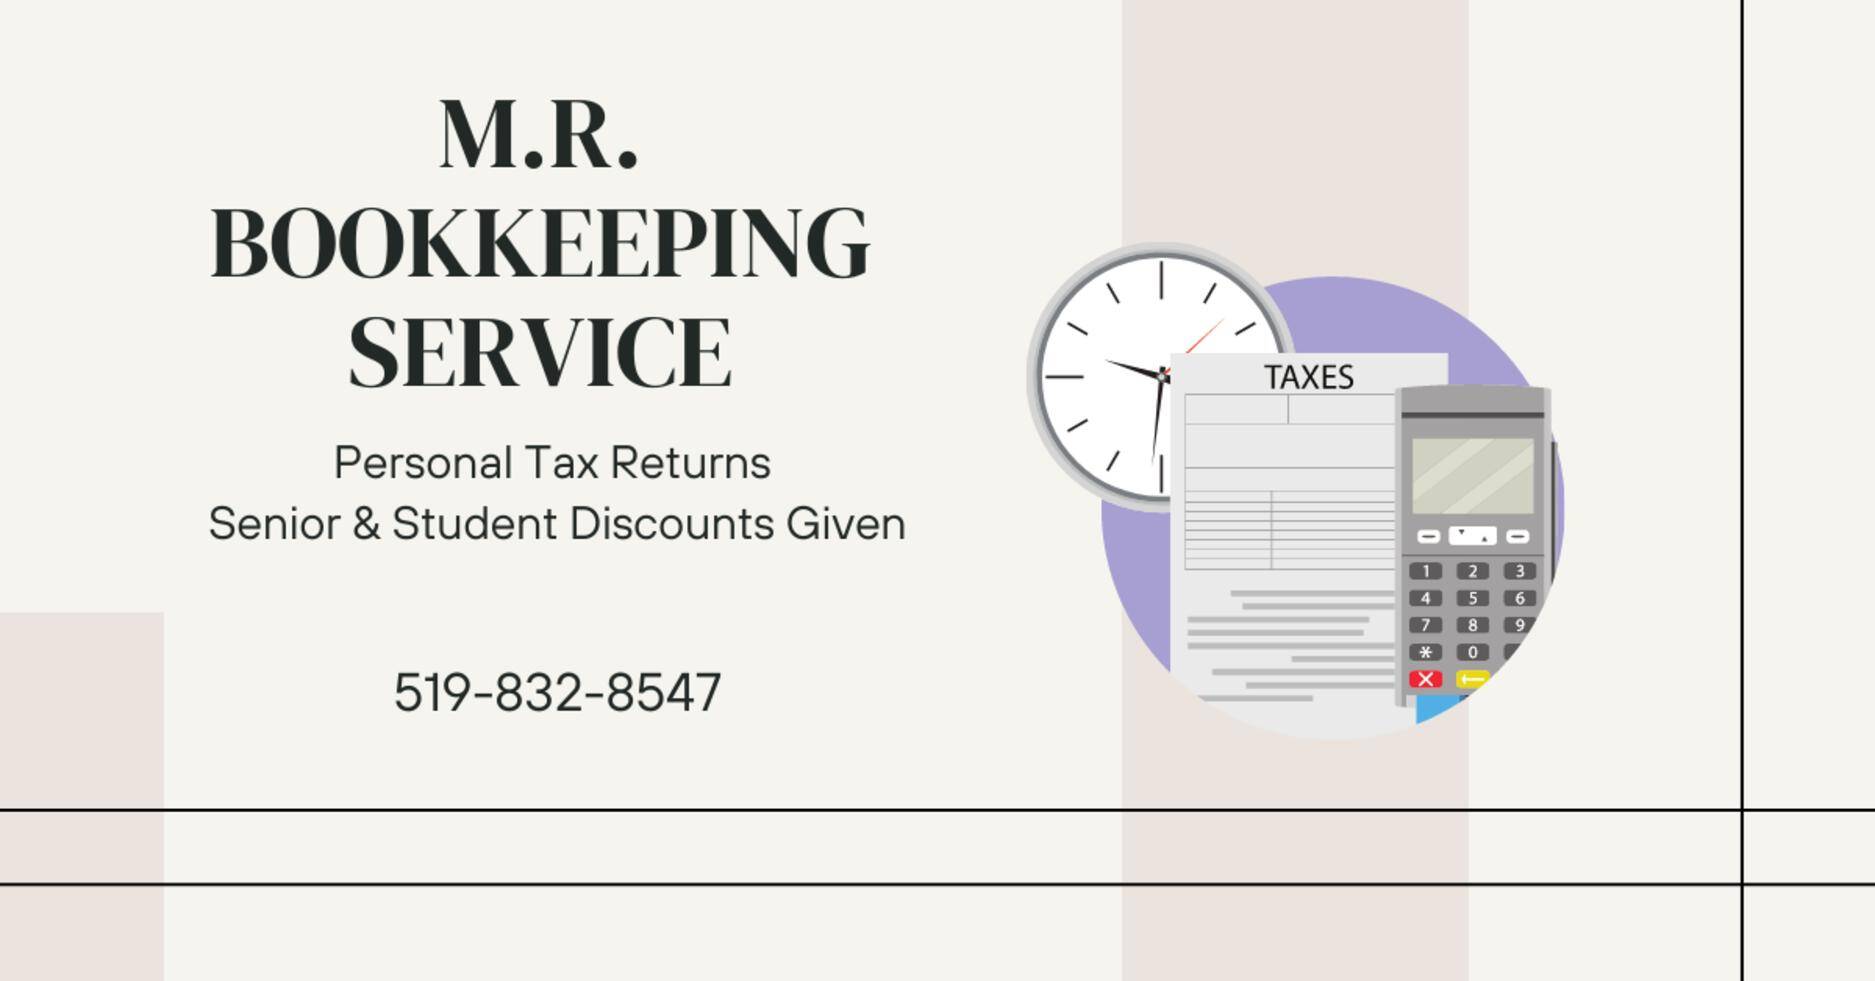 M.R. Bookkeeping Services